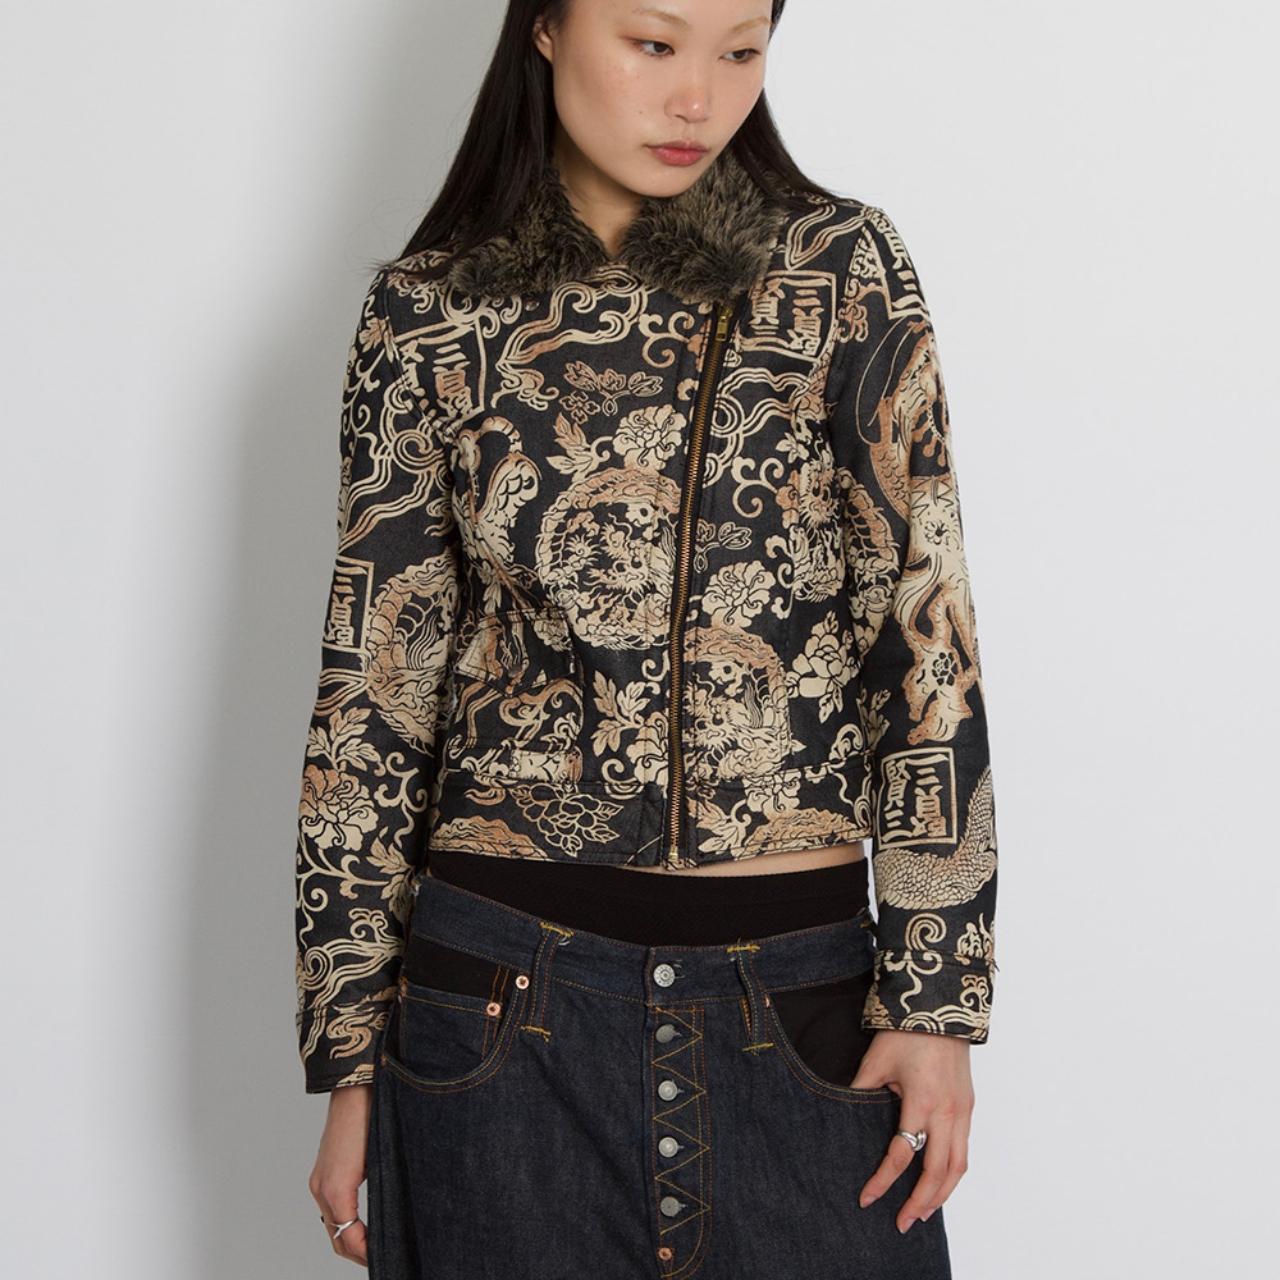 Kenzo vintage dragon print jacket

condition: this item is a vintage/pre-worn piece so some signs of natural wear and age are to be expected. however in good general condition

size labelled: s